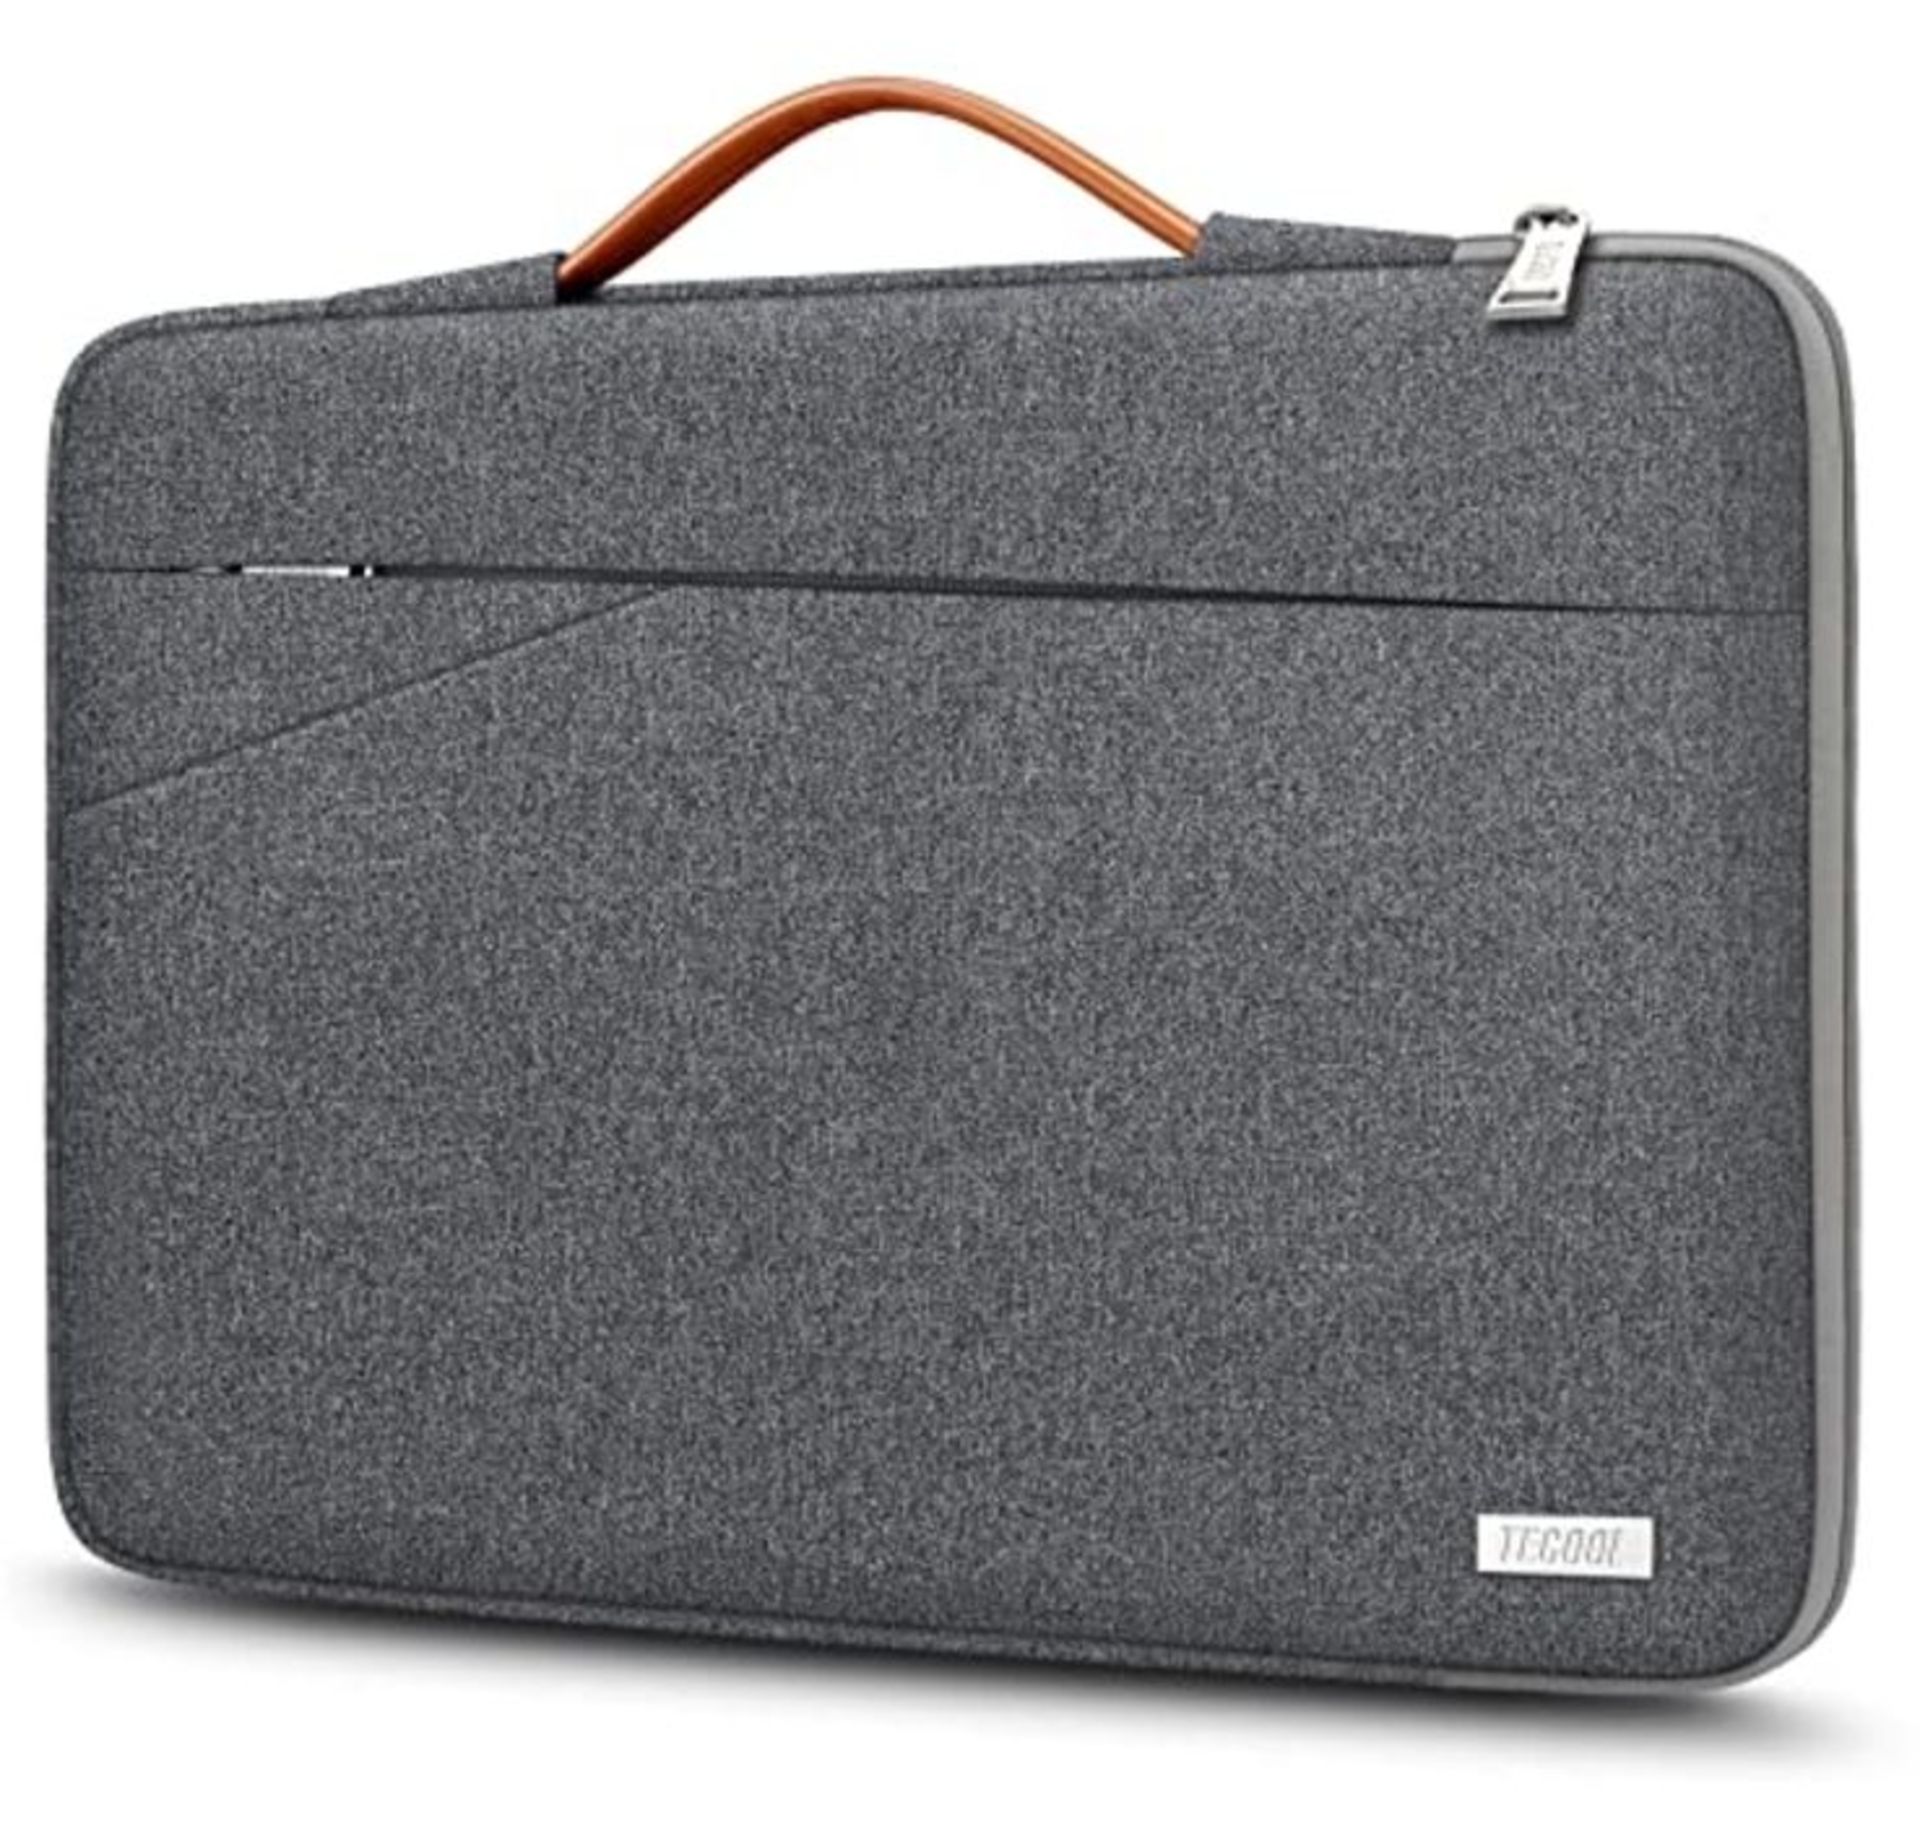 TECOOL 14 Inch Laptop Sleeve Protective Case Cover with Handle and Pockets for 14 Inch